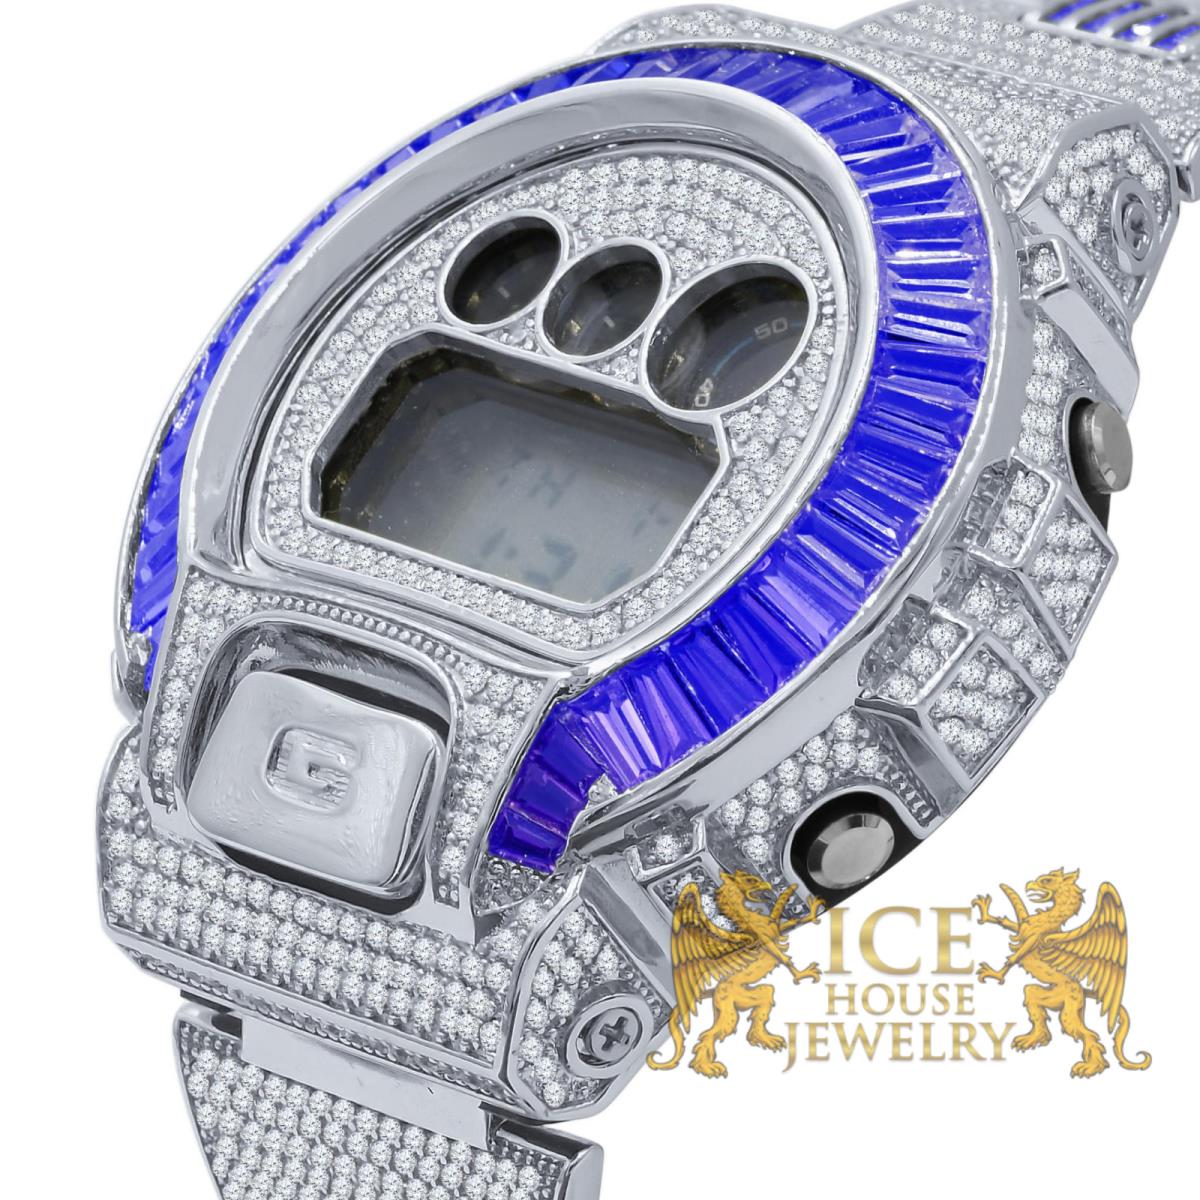 Icy Blue Sapphire Baguettes On White Gold Casio G-shock DW-6900 Watch